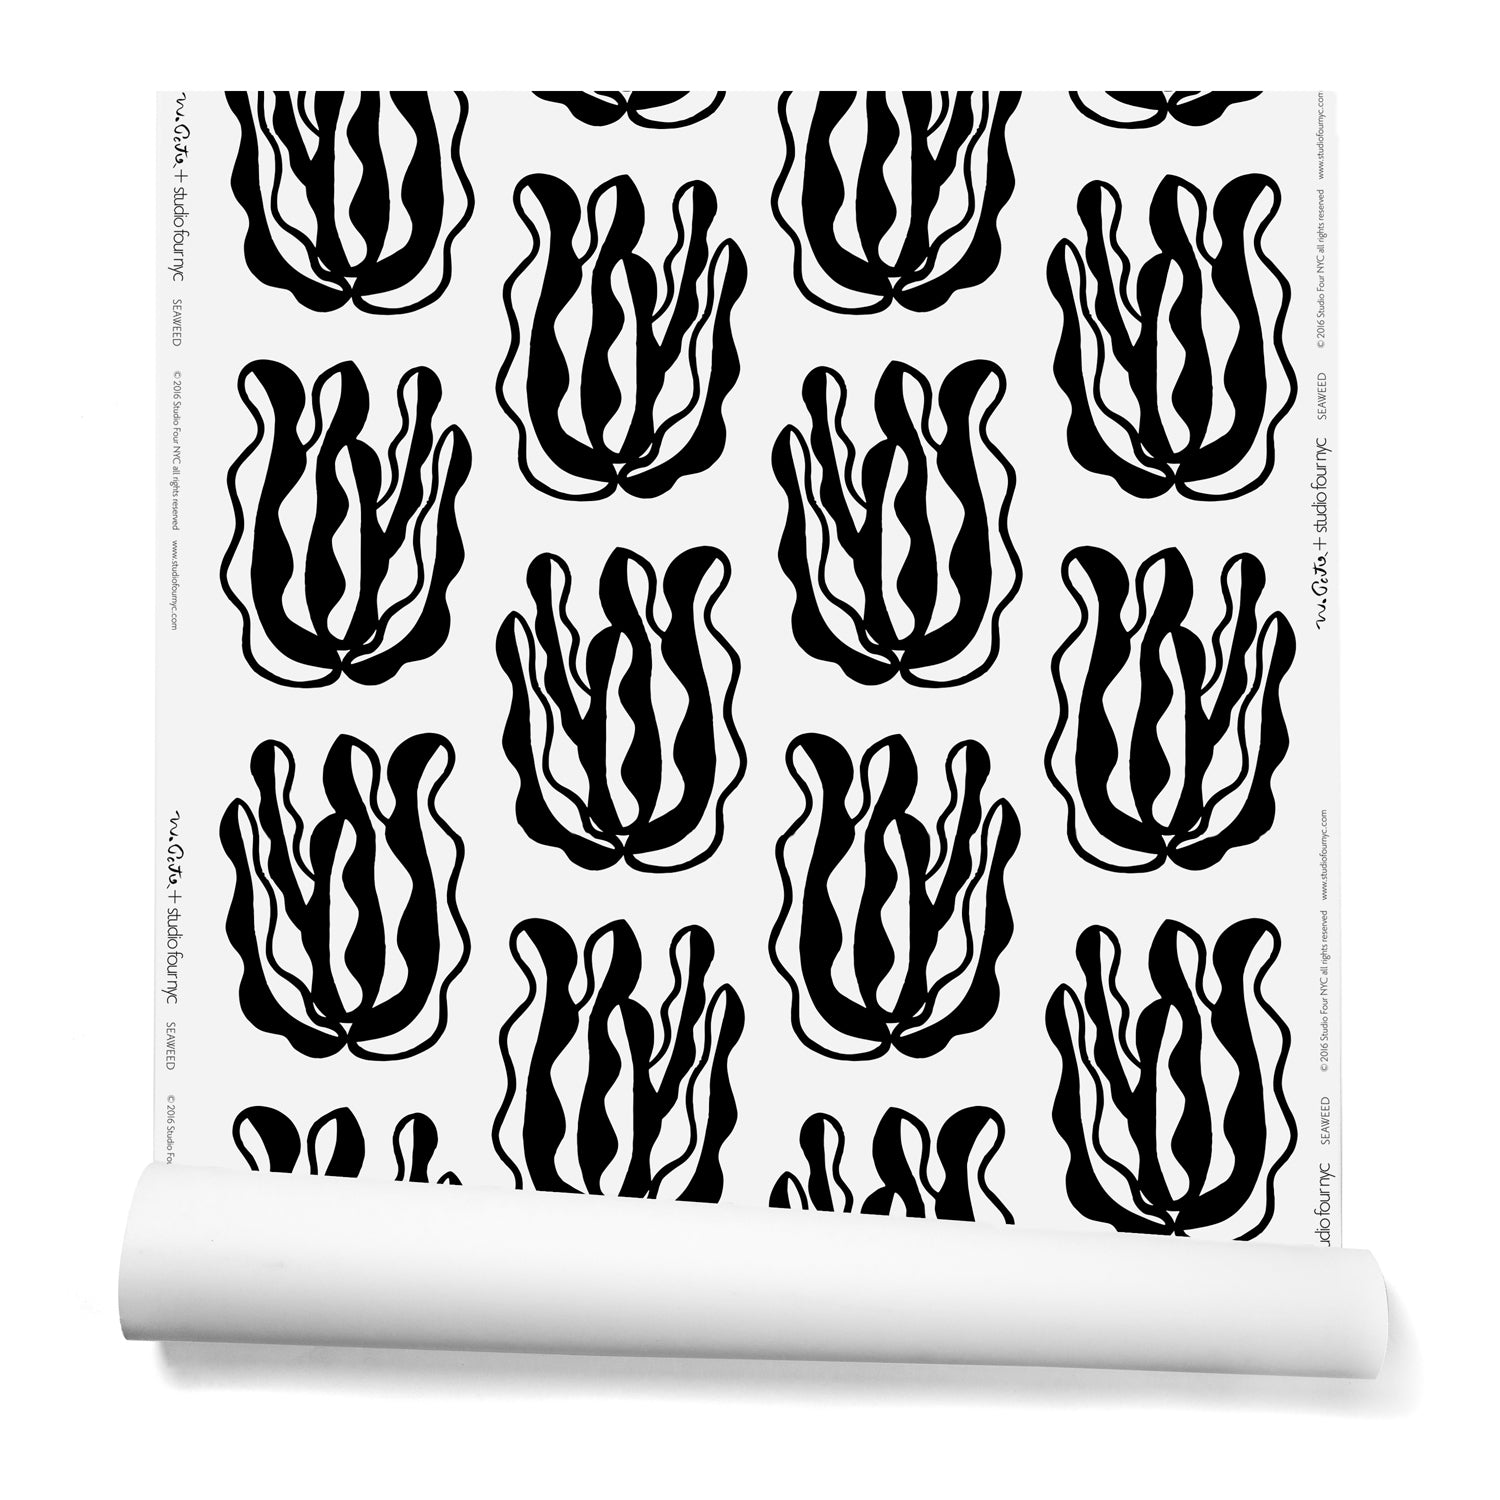 A hanging roll of wallpaper with a large-scale cartoon seaweed print in black on a white background.